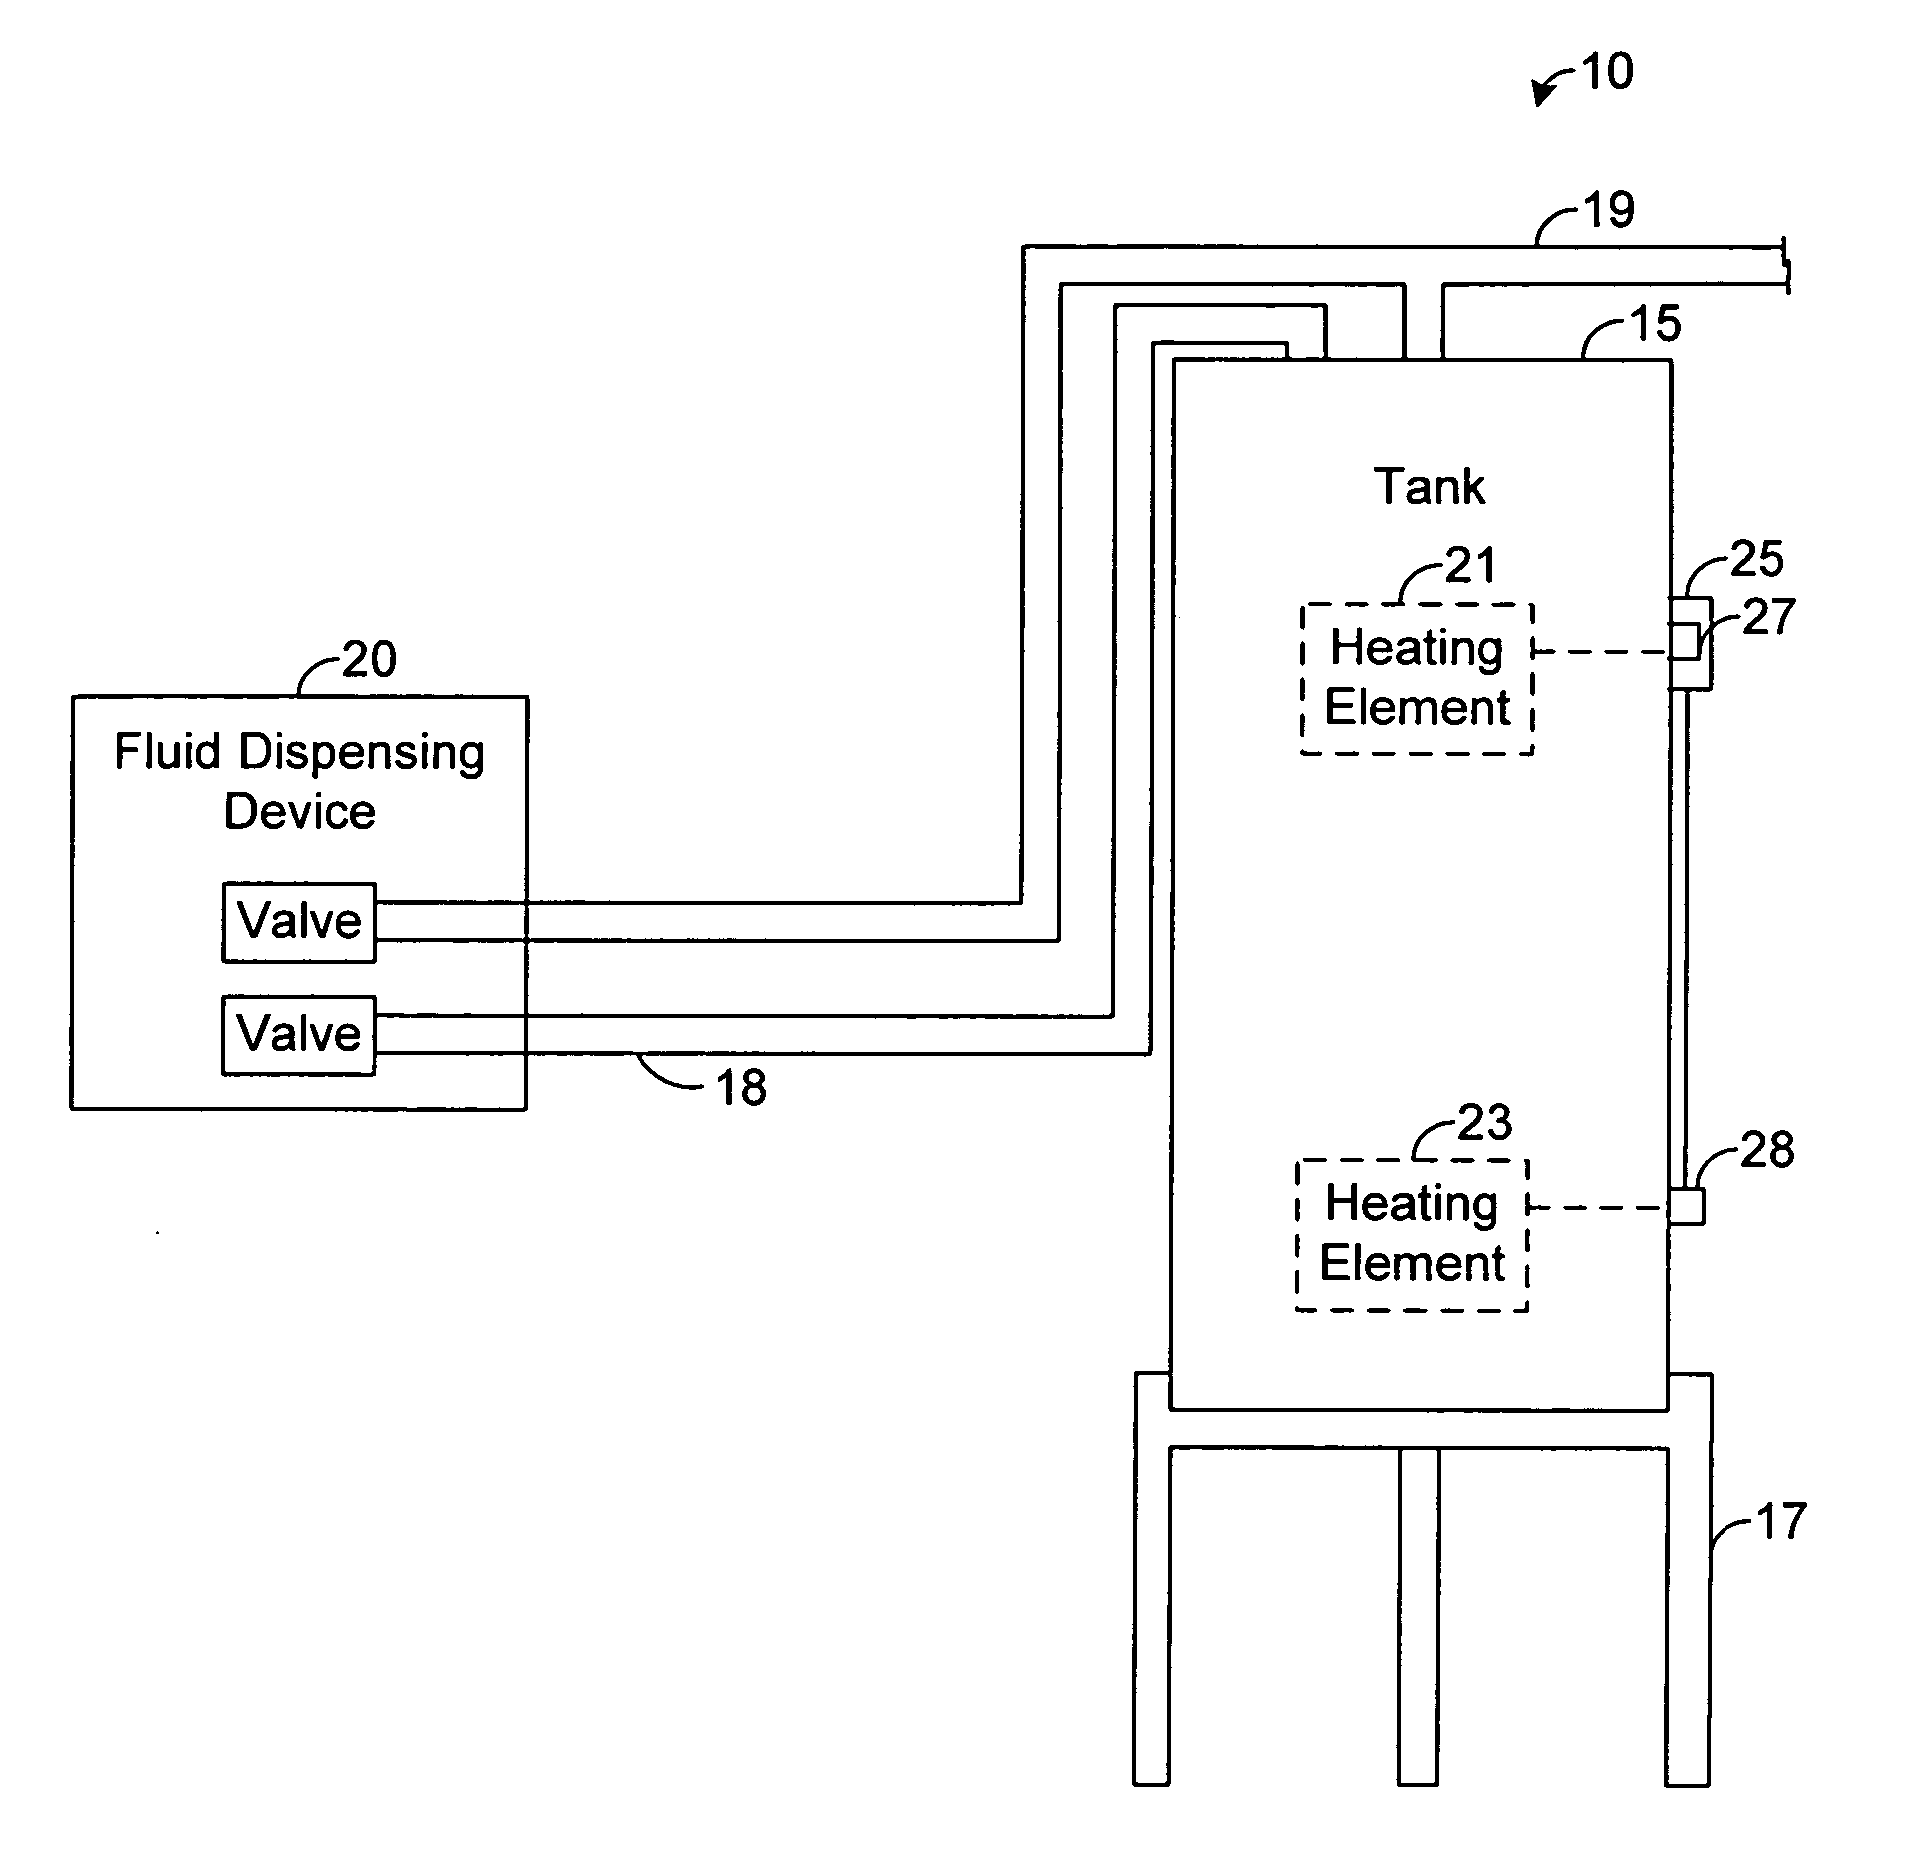 System and method for estimating and indicating temperature characteristics of temperature controlled liquids